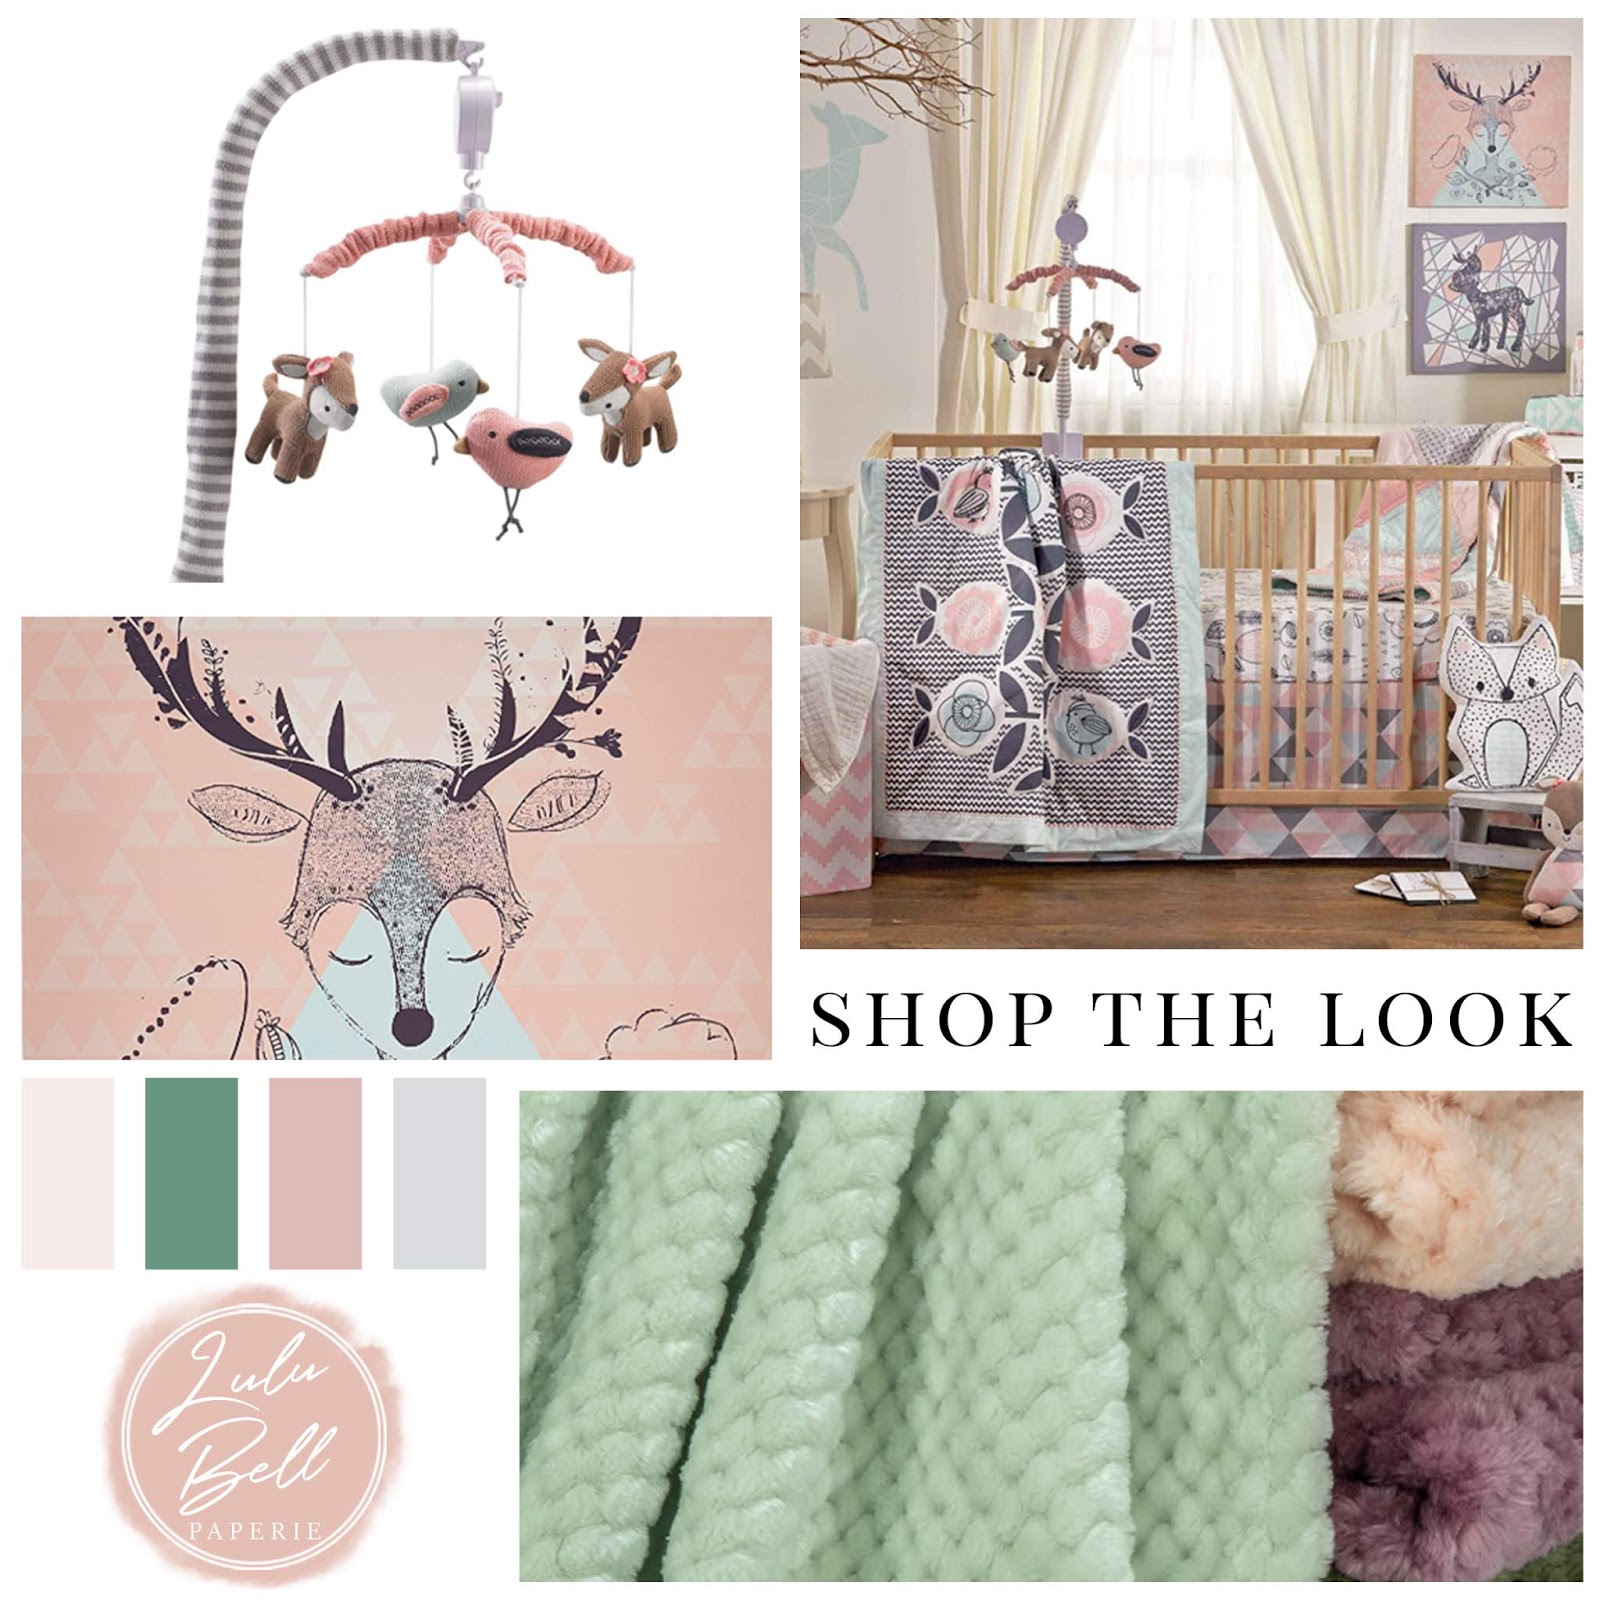 Bohemian themed baby nursery with deer, birds, and geometric shapes. Includes crib bedding ensemble, wall decor and art prints, infant mobile, blankets, toys, and matching decor. In pink, gray, blue, color palette perfect for a baby girl’s nursery!